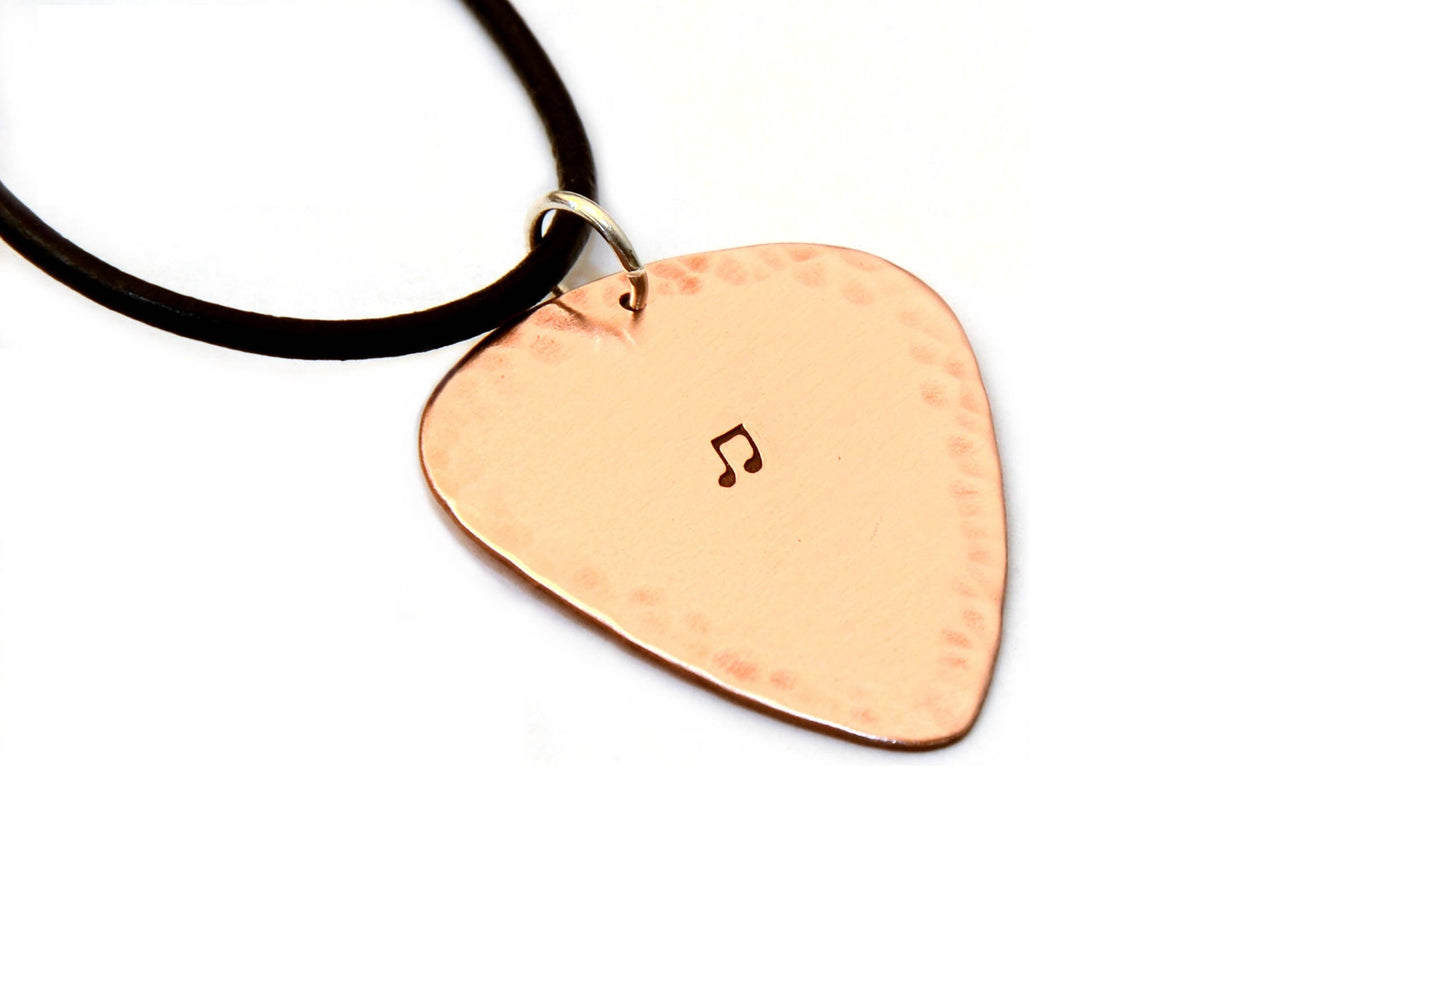 Hammered Copper Guitar Pick Necklace with Music Note